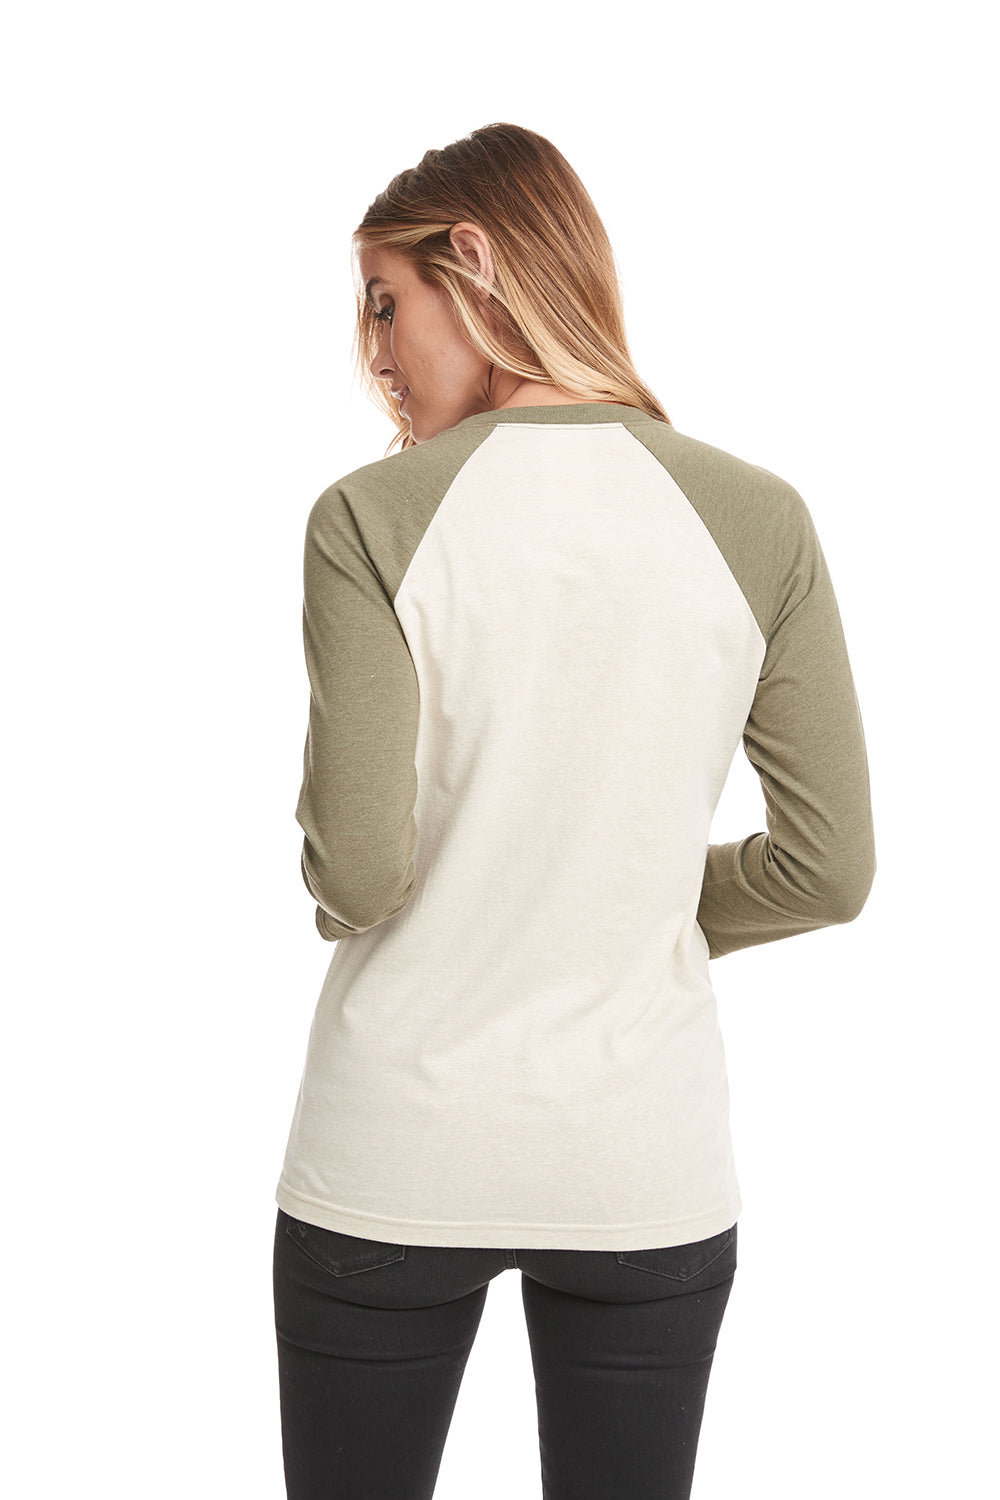 Next Level 6251 Womens Burnout Long Sleeve Hooded T-Shirt Hoodie Cream/Military Green Back